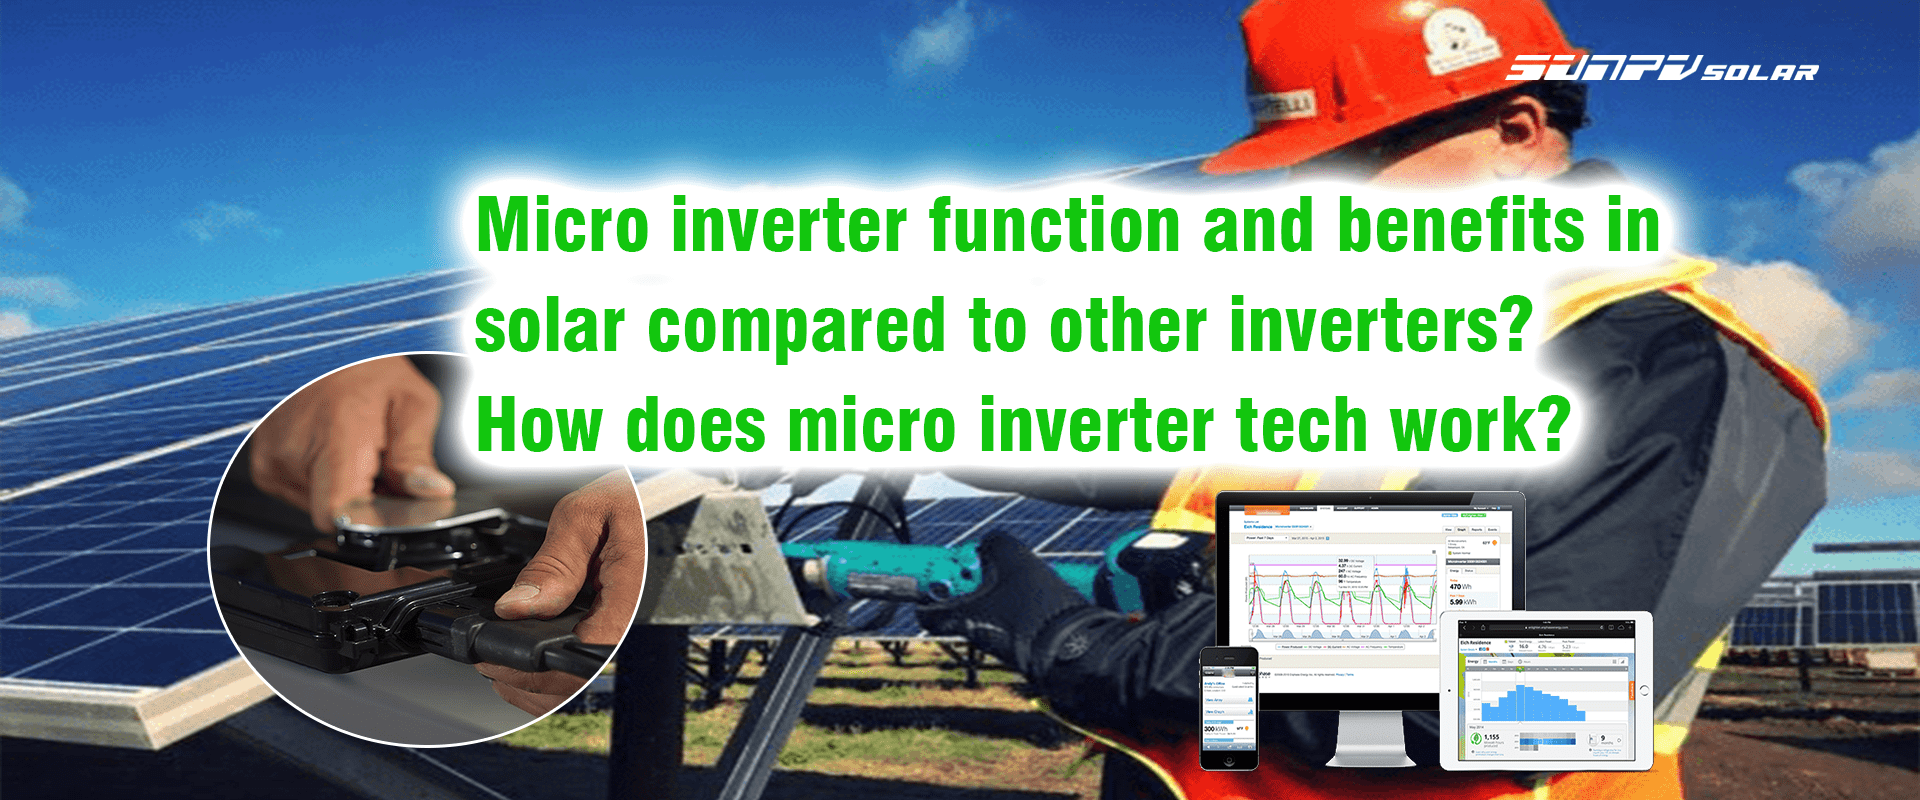 Micro inverter function and benefits in solar compared to other inverters? How does micro inverter tech work?